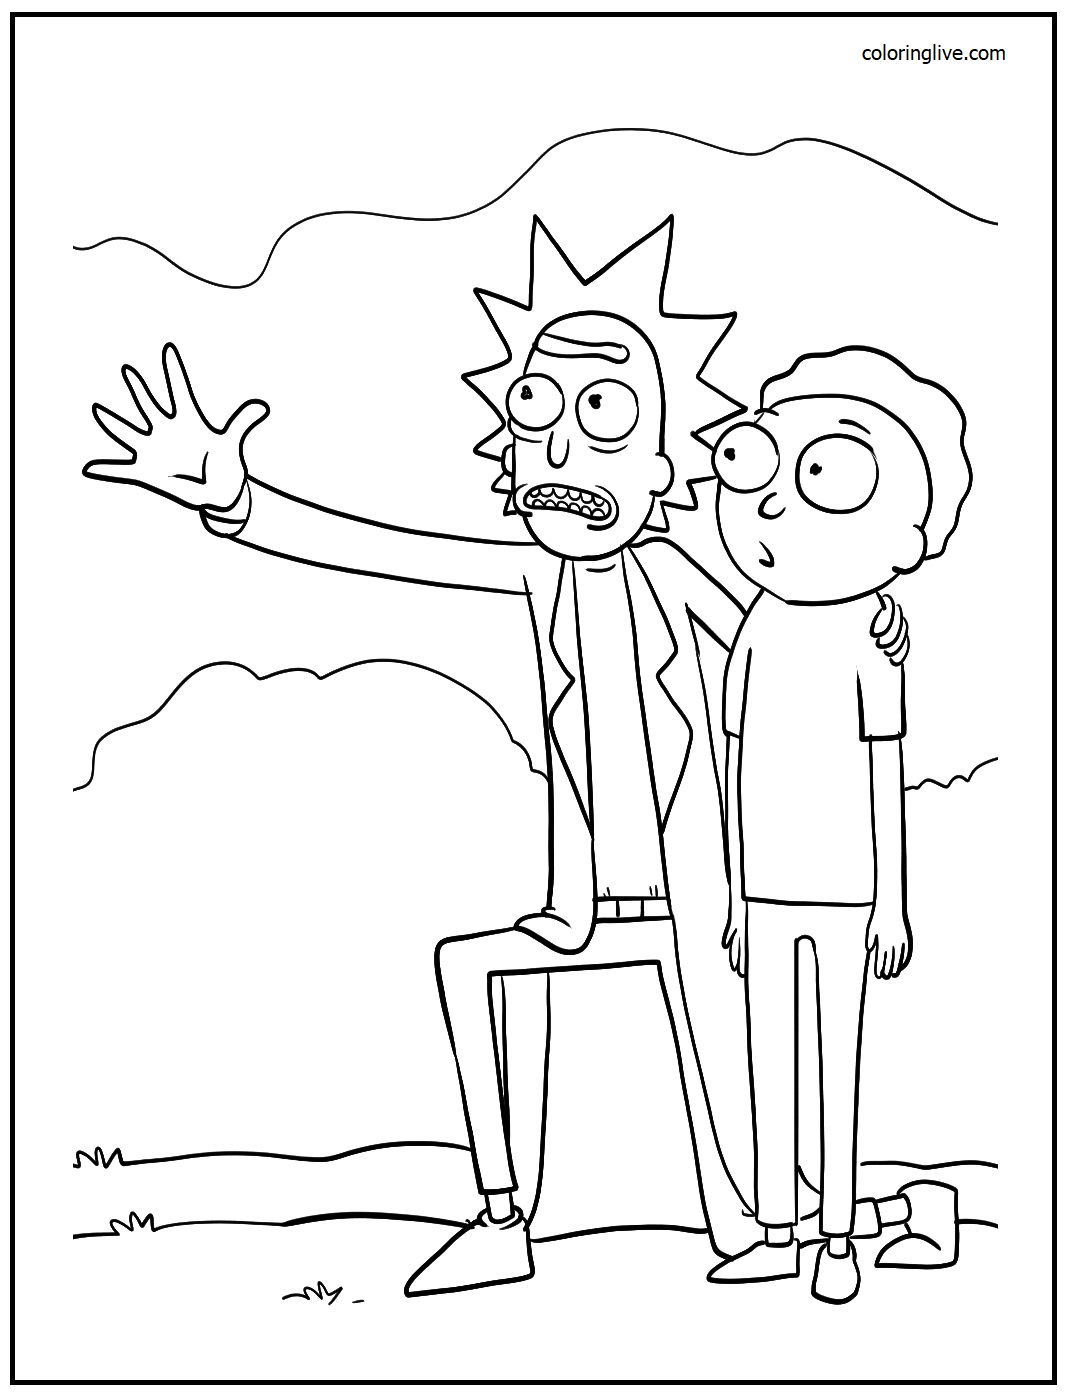 Printable Rick and Morty Coloring Page for kids.